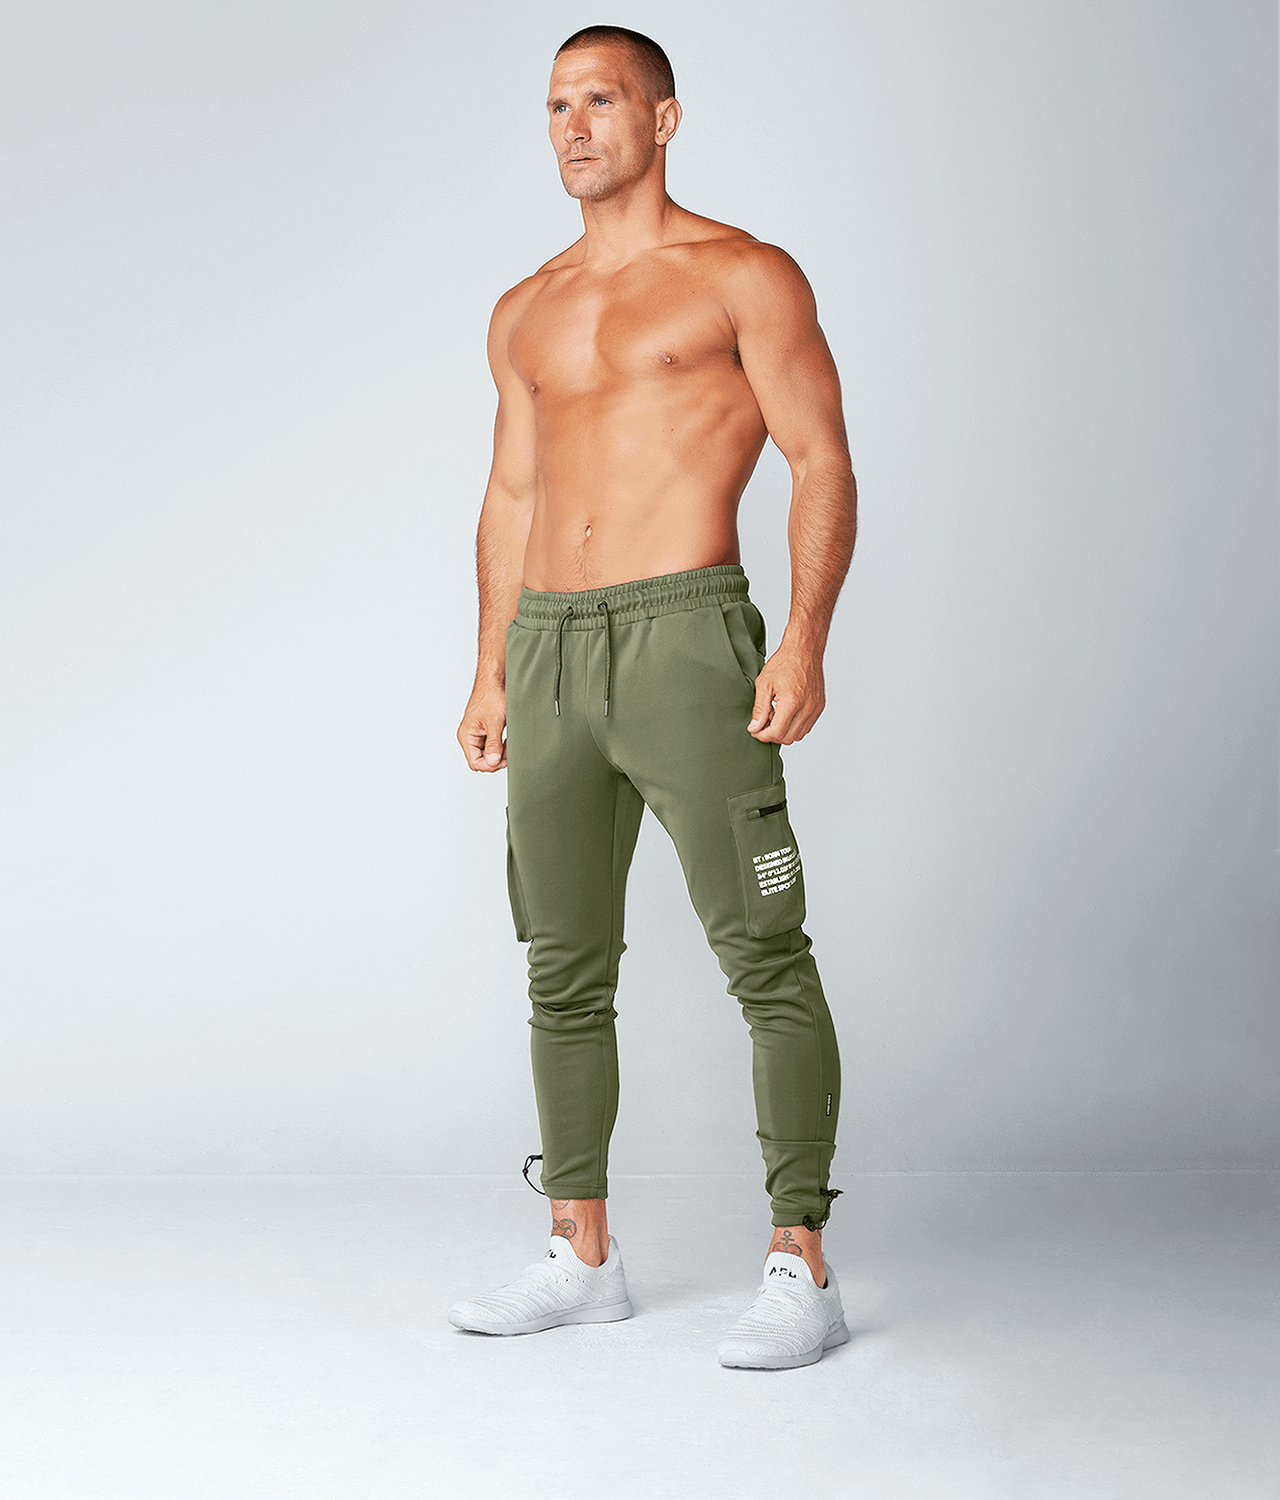 Born Tough Momentum Fitted Cargo Gym Workout Jogger Pants for Men Military  Green - Elite Sports